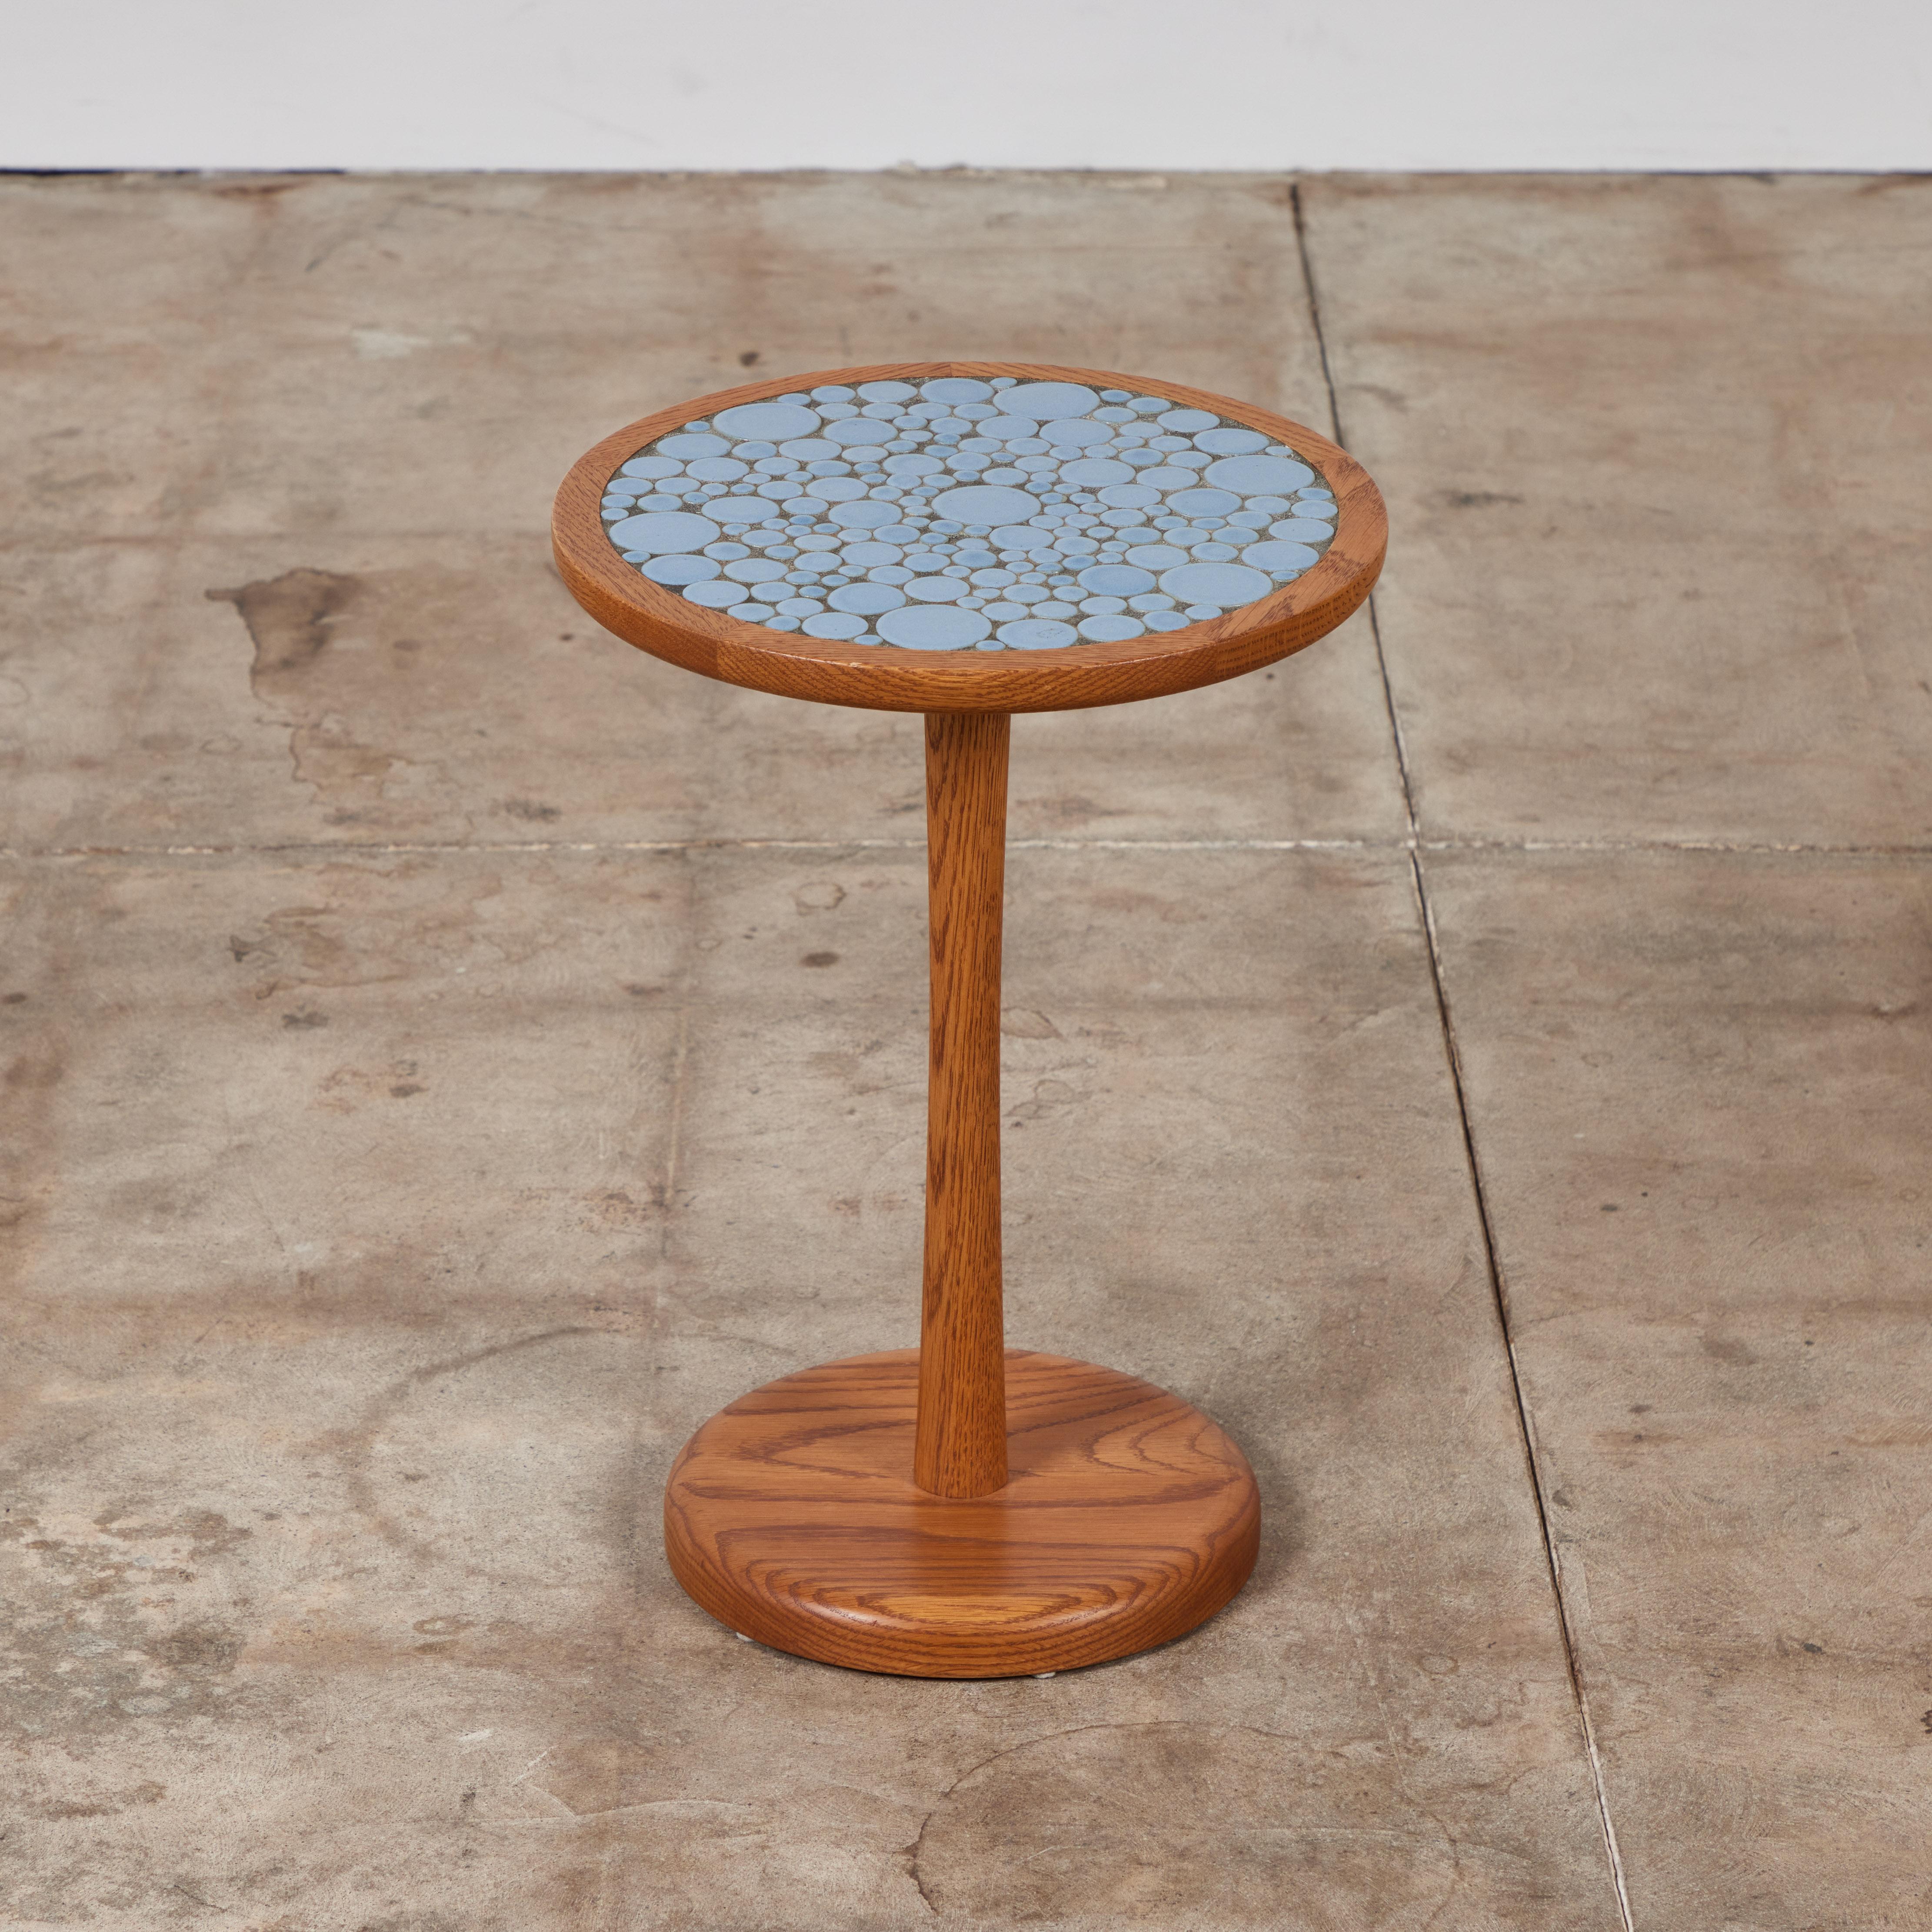 Round side table by Gordon & Jane Martz. The table top is inlaid with ceramic coin tiles in a soft  powder blue matte glaze. The frame, base and pedestal of the table are all solid walnut.

Dimensions
﻿13